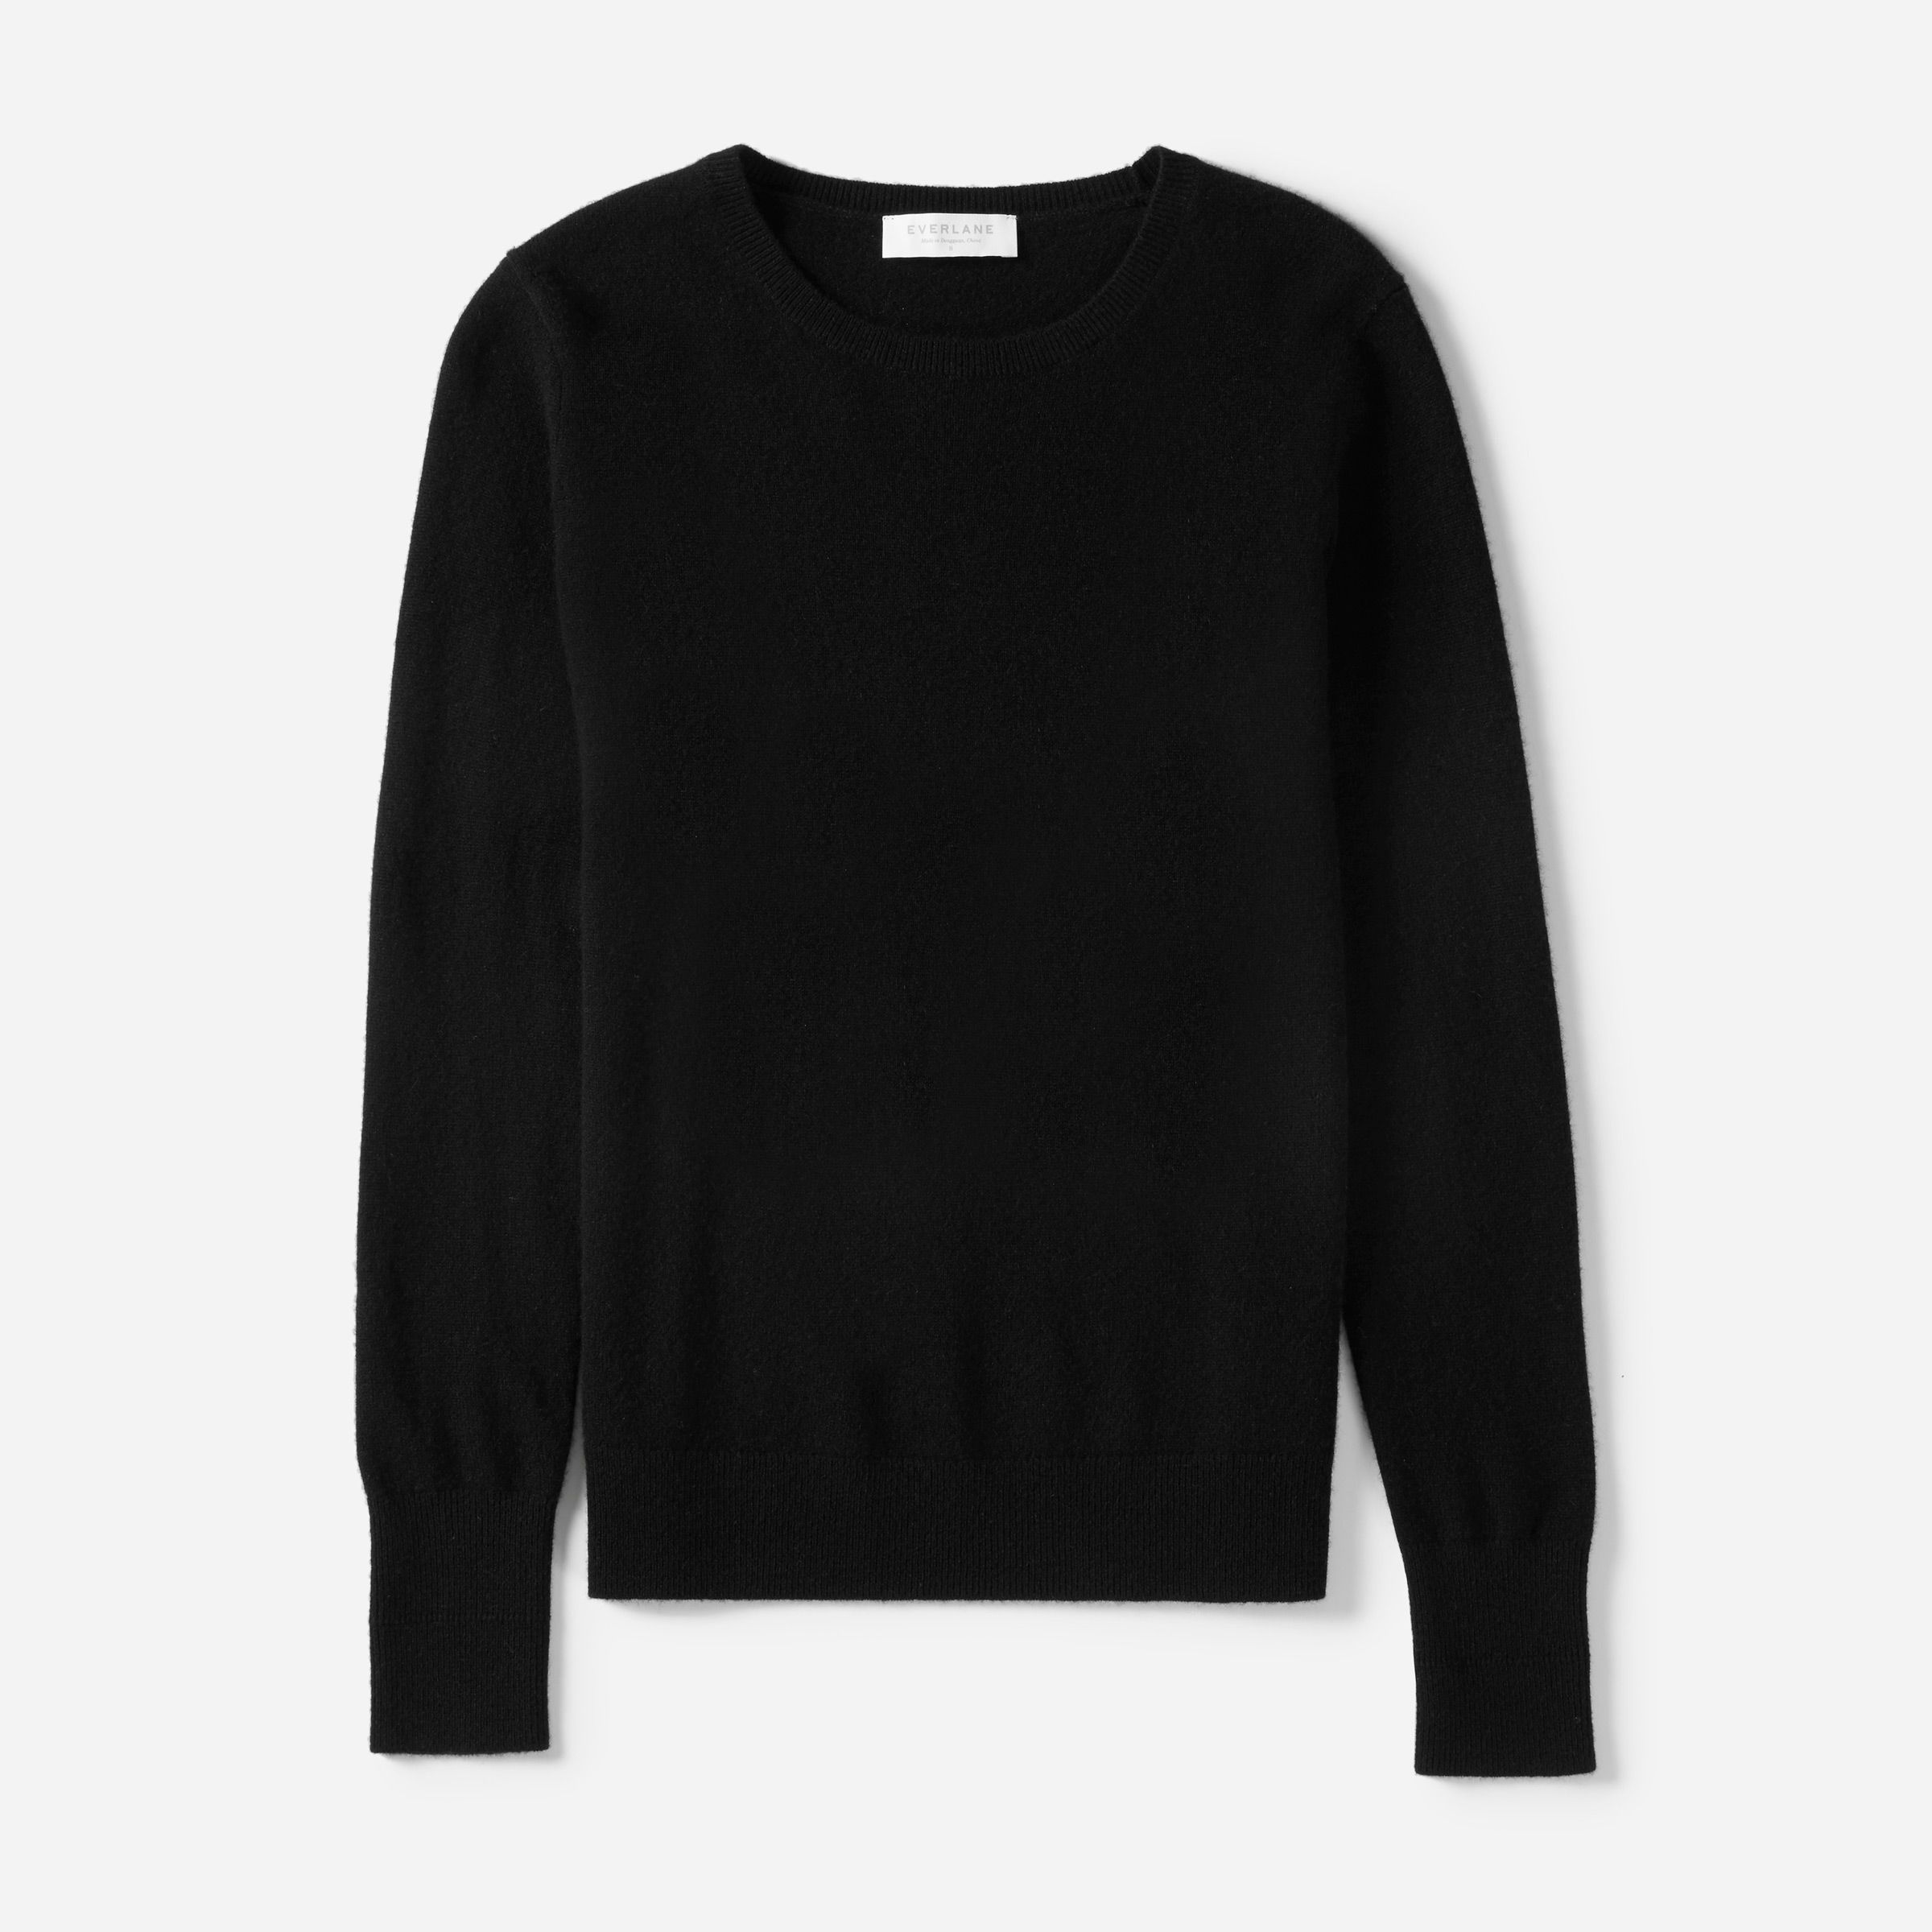 HomeWomenSweaters The Cashmere CrewThe Cashmere CrewFeels greatAn instant essential!great cashmere s | Everlane